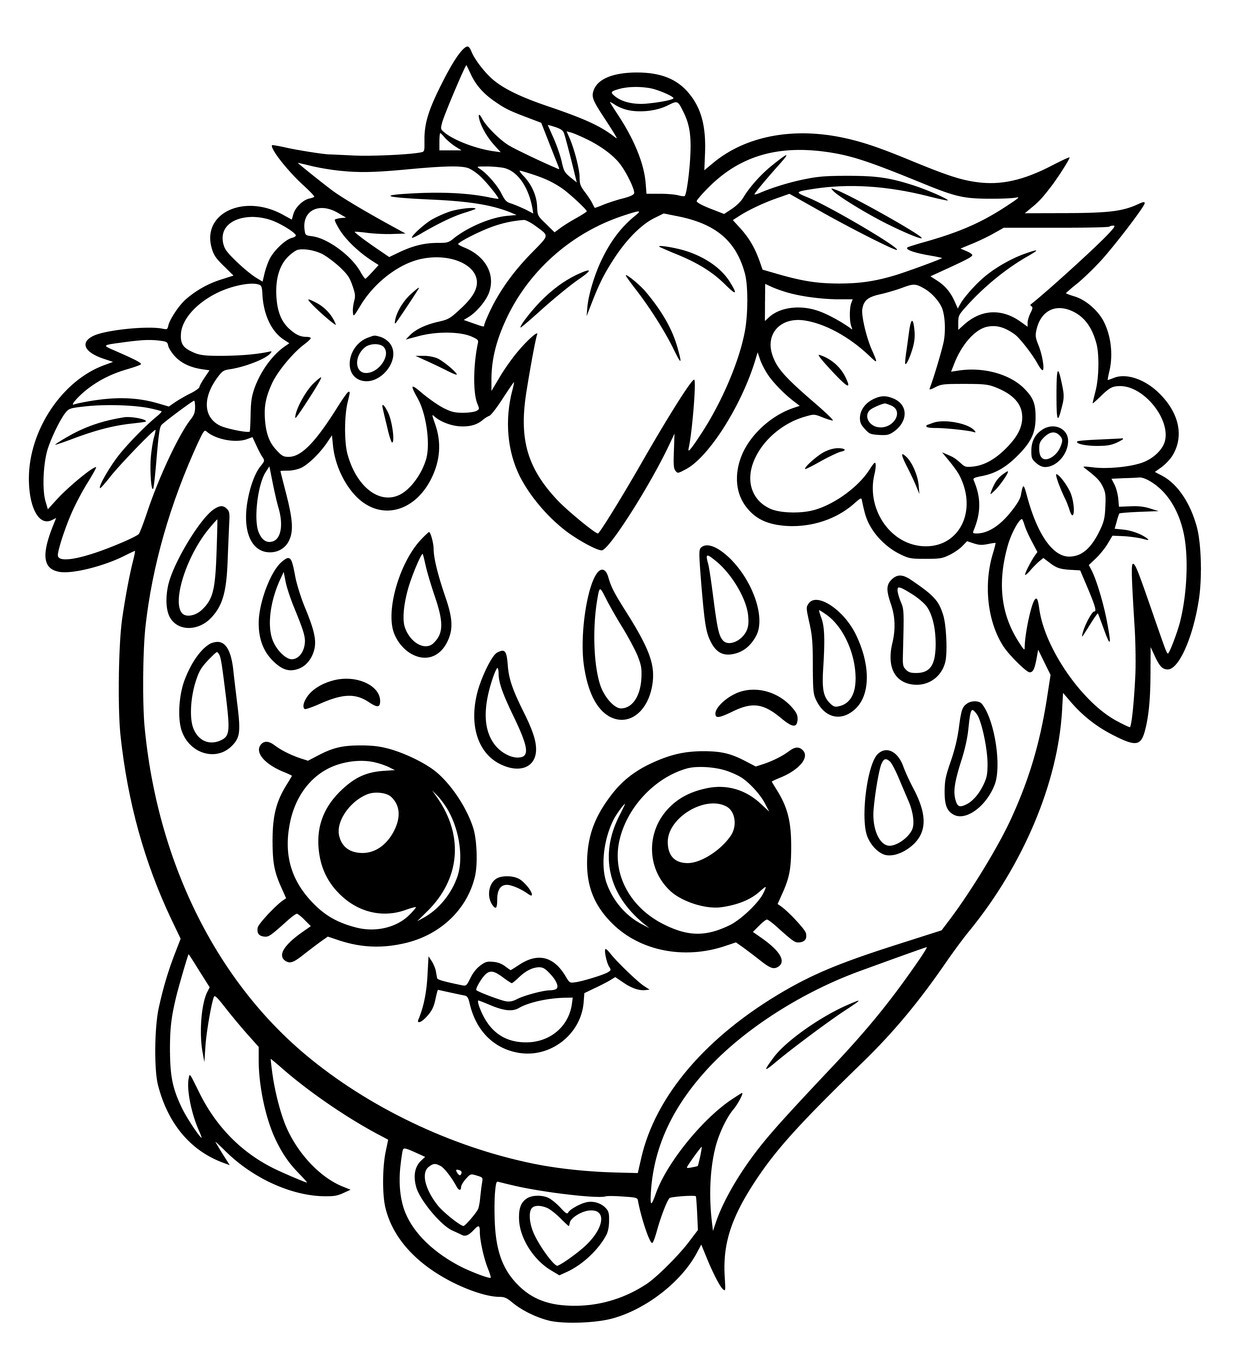 Shopkins Coloring Pages For Kids
 Print Shopkins Coloring Pages Printable